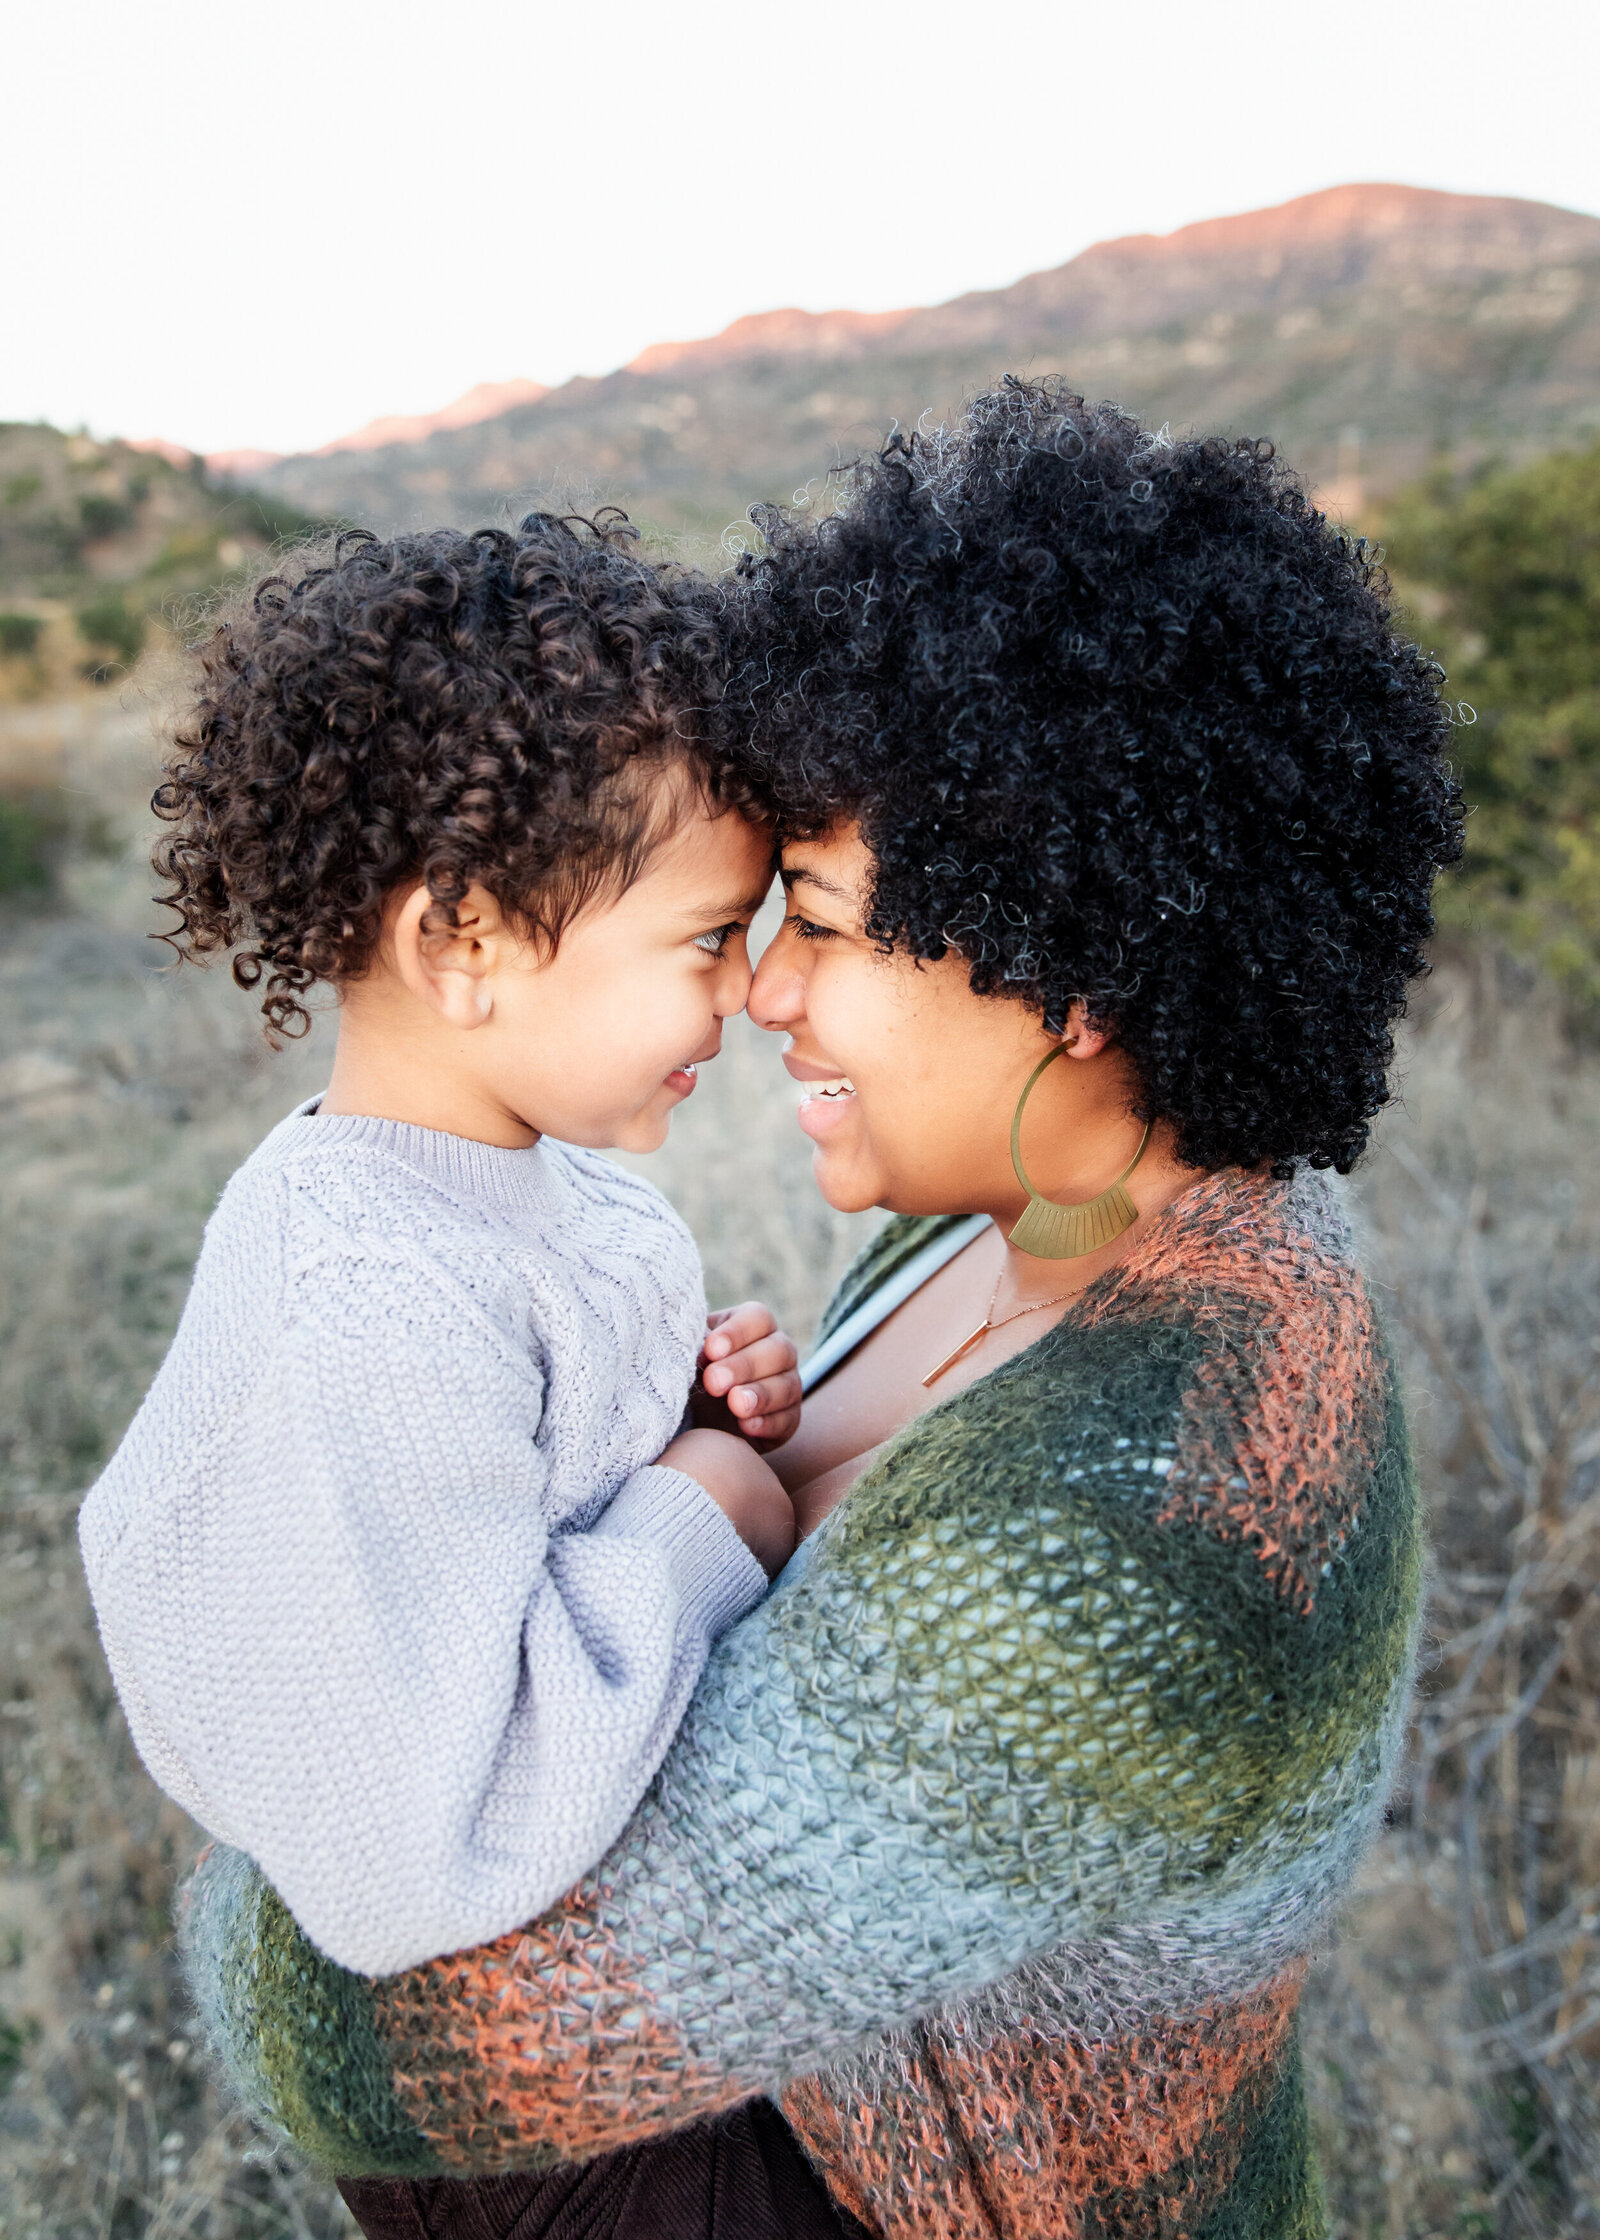 untitled-221120-179-EditOjai-Photographer-Early-Morning-Portrait-Session-Mother-Boy-Snuggle-Nose-kiss